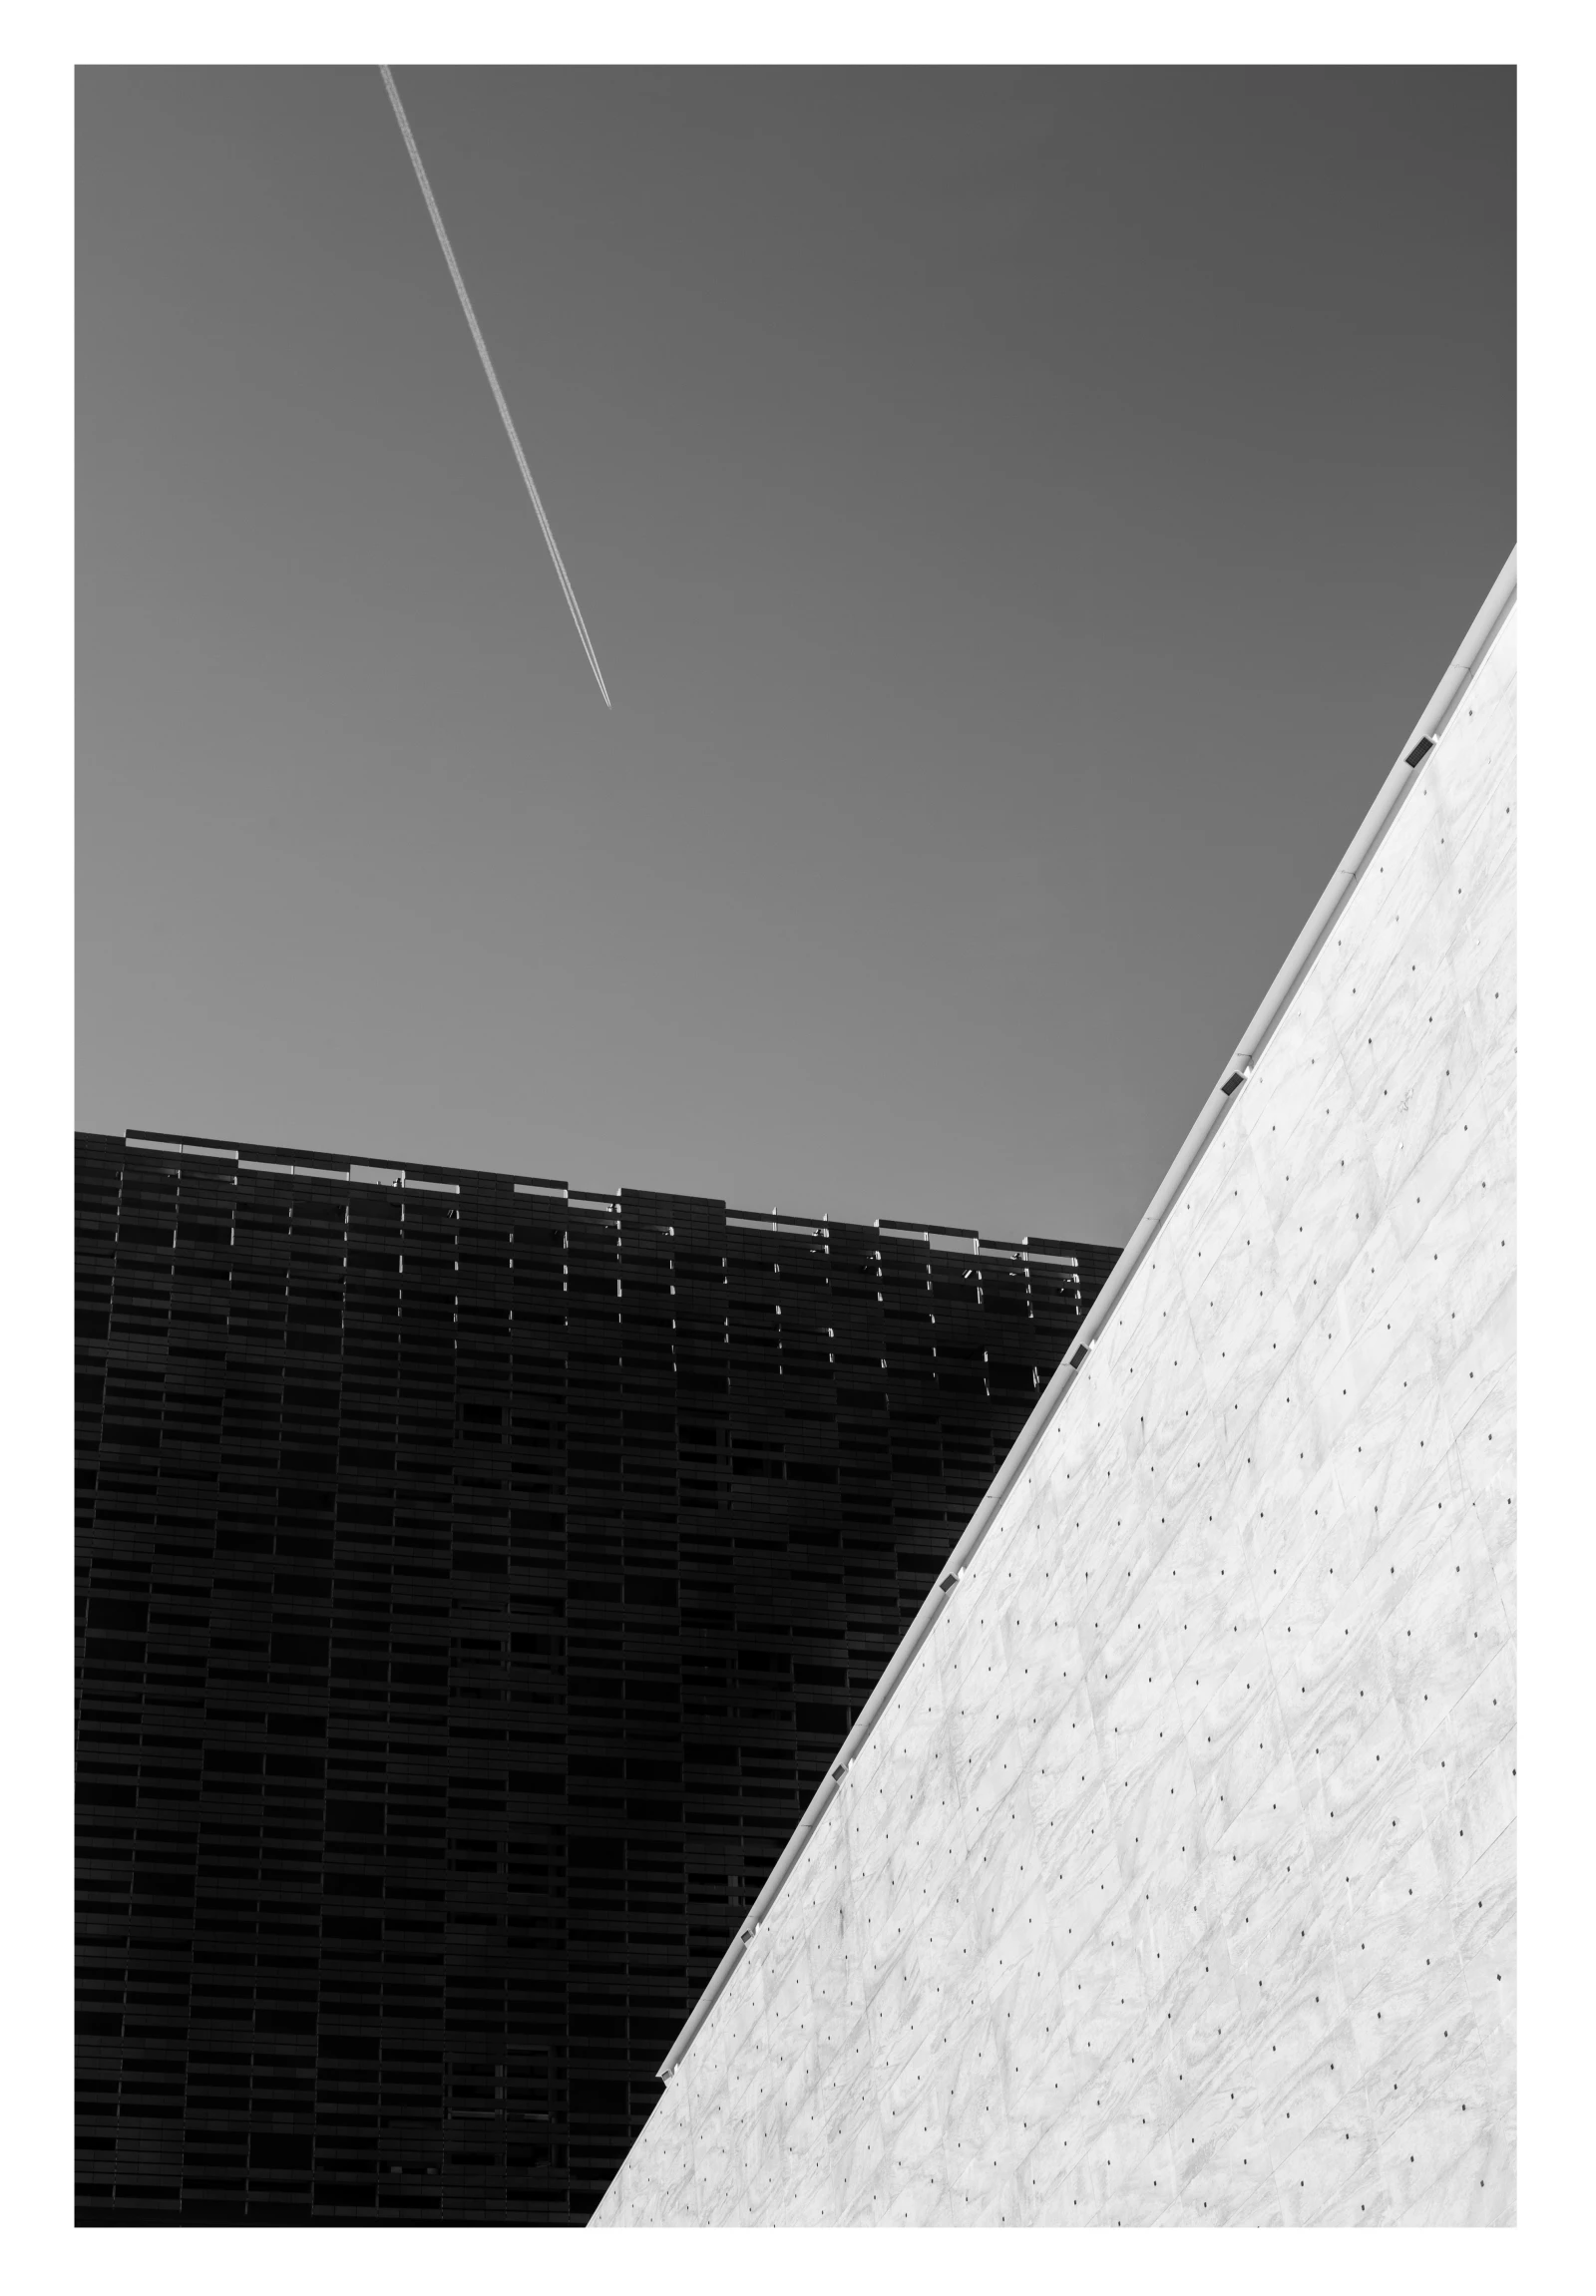 a black and white po of a plane flying over the top of the building